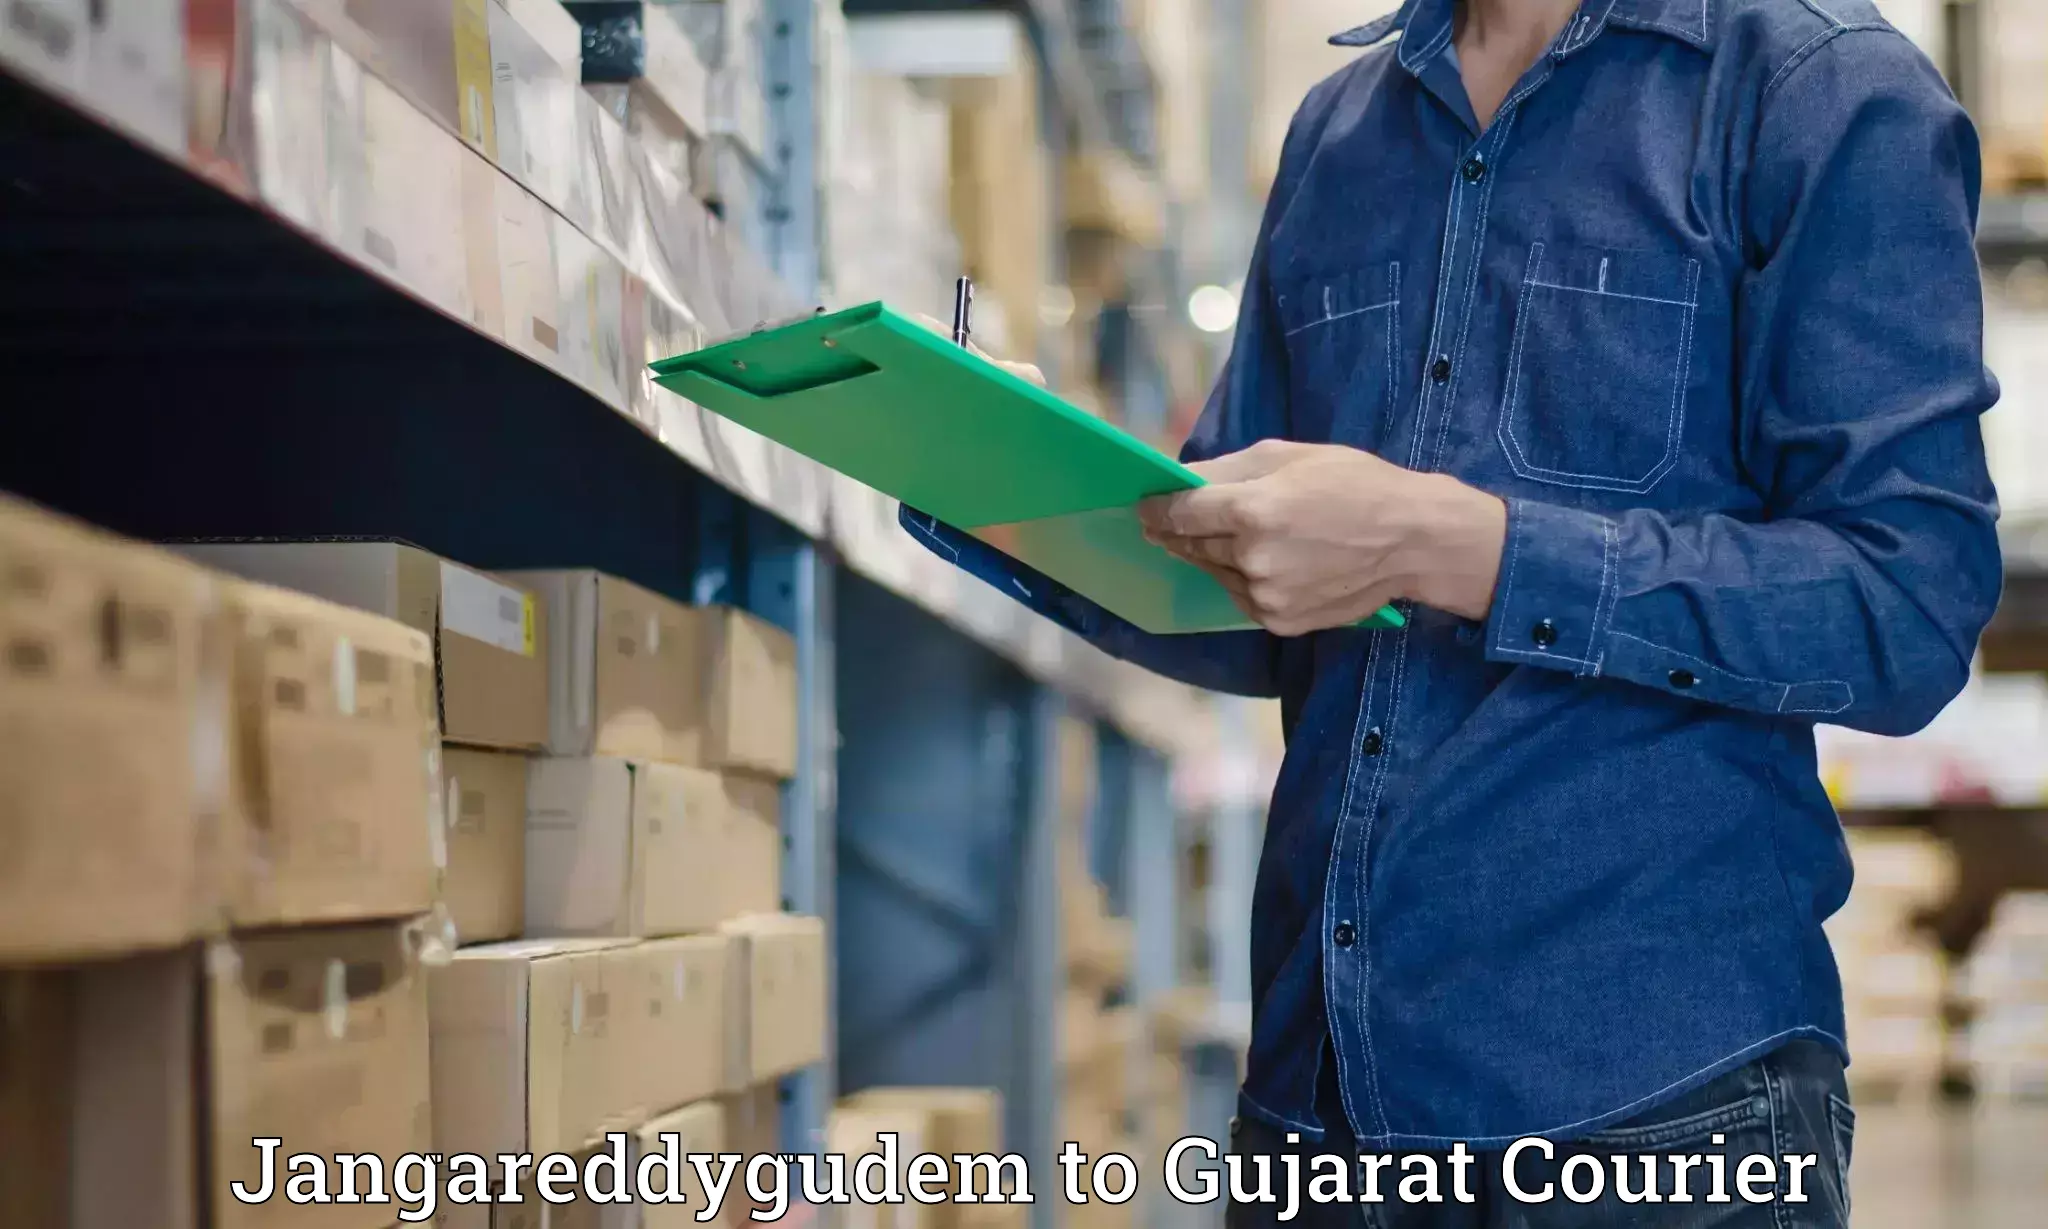 Efficient package consolidation Jangareddygudem to Ahmedabad